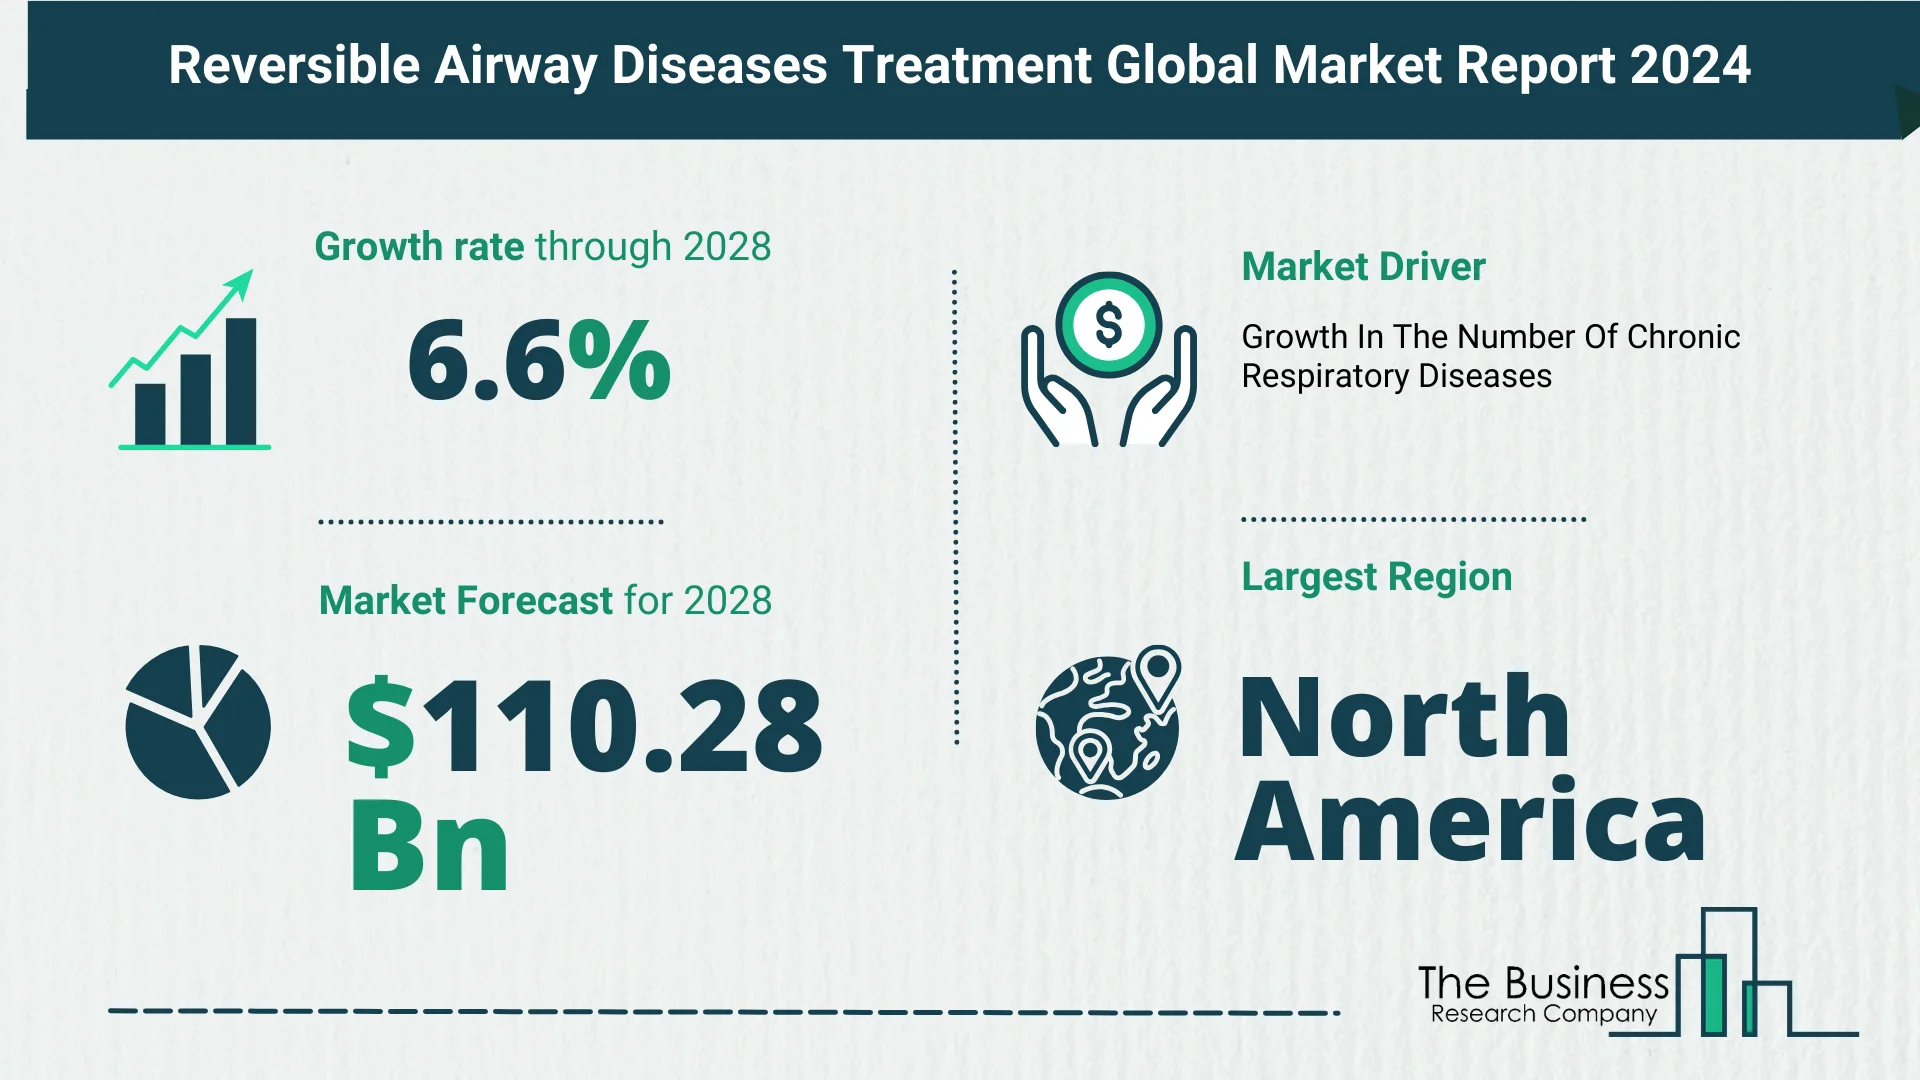 Key Insights On The Reversible Airway Diseases Treatment Market 2024 – Size, Driver, And Major Players